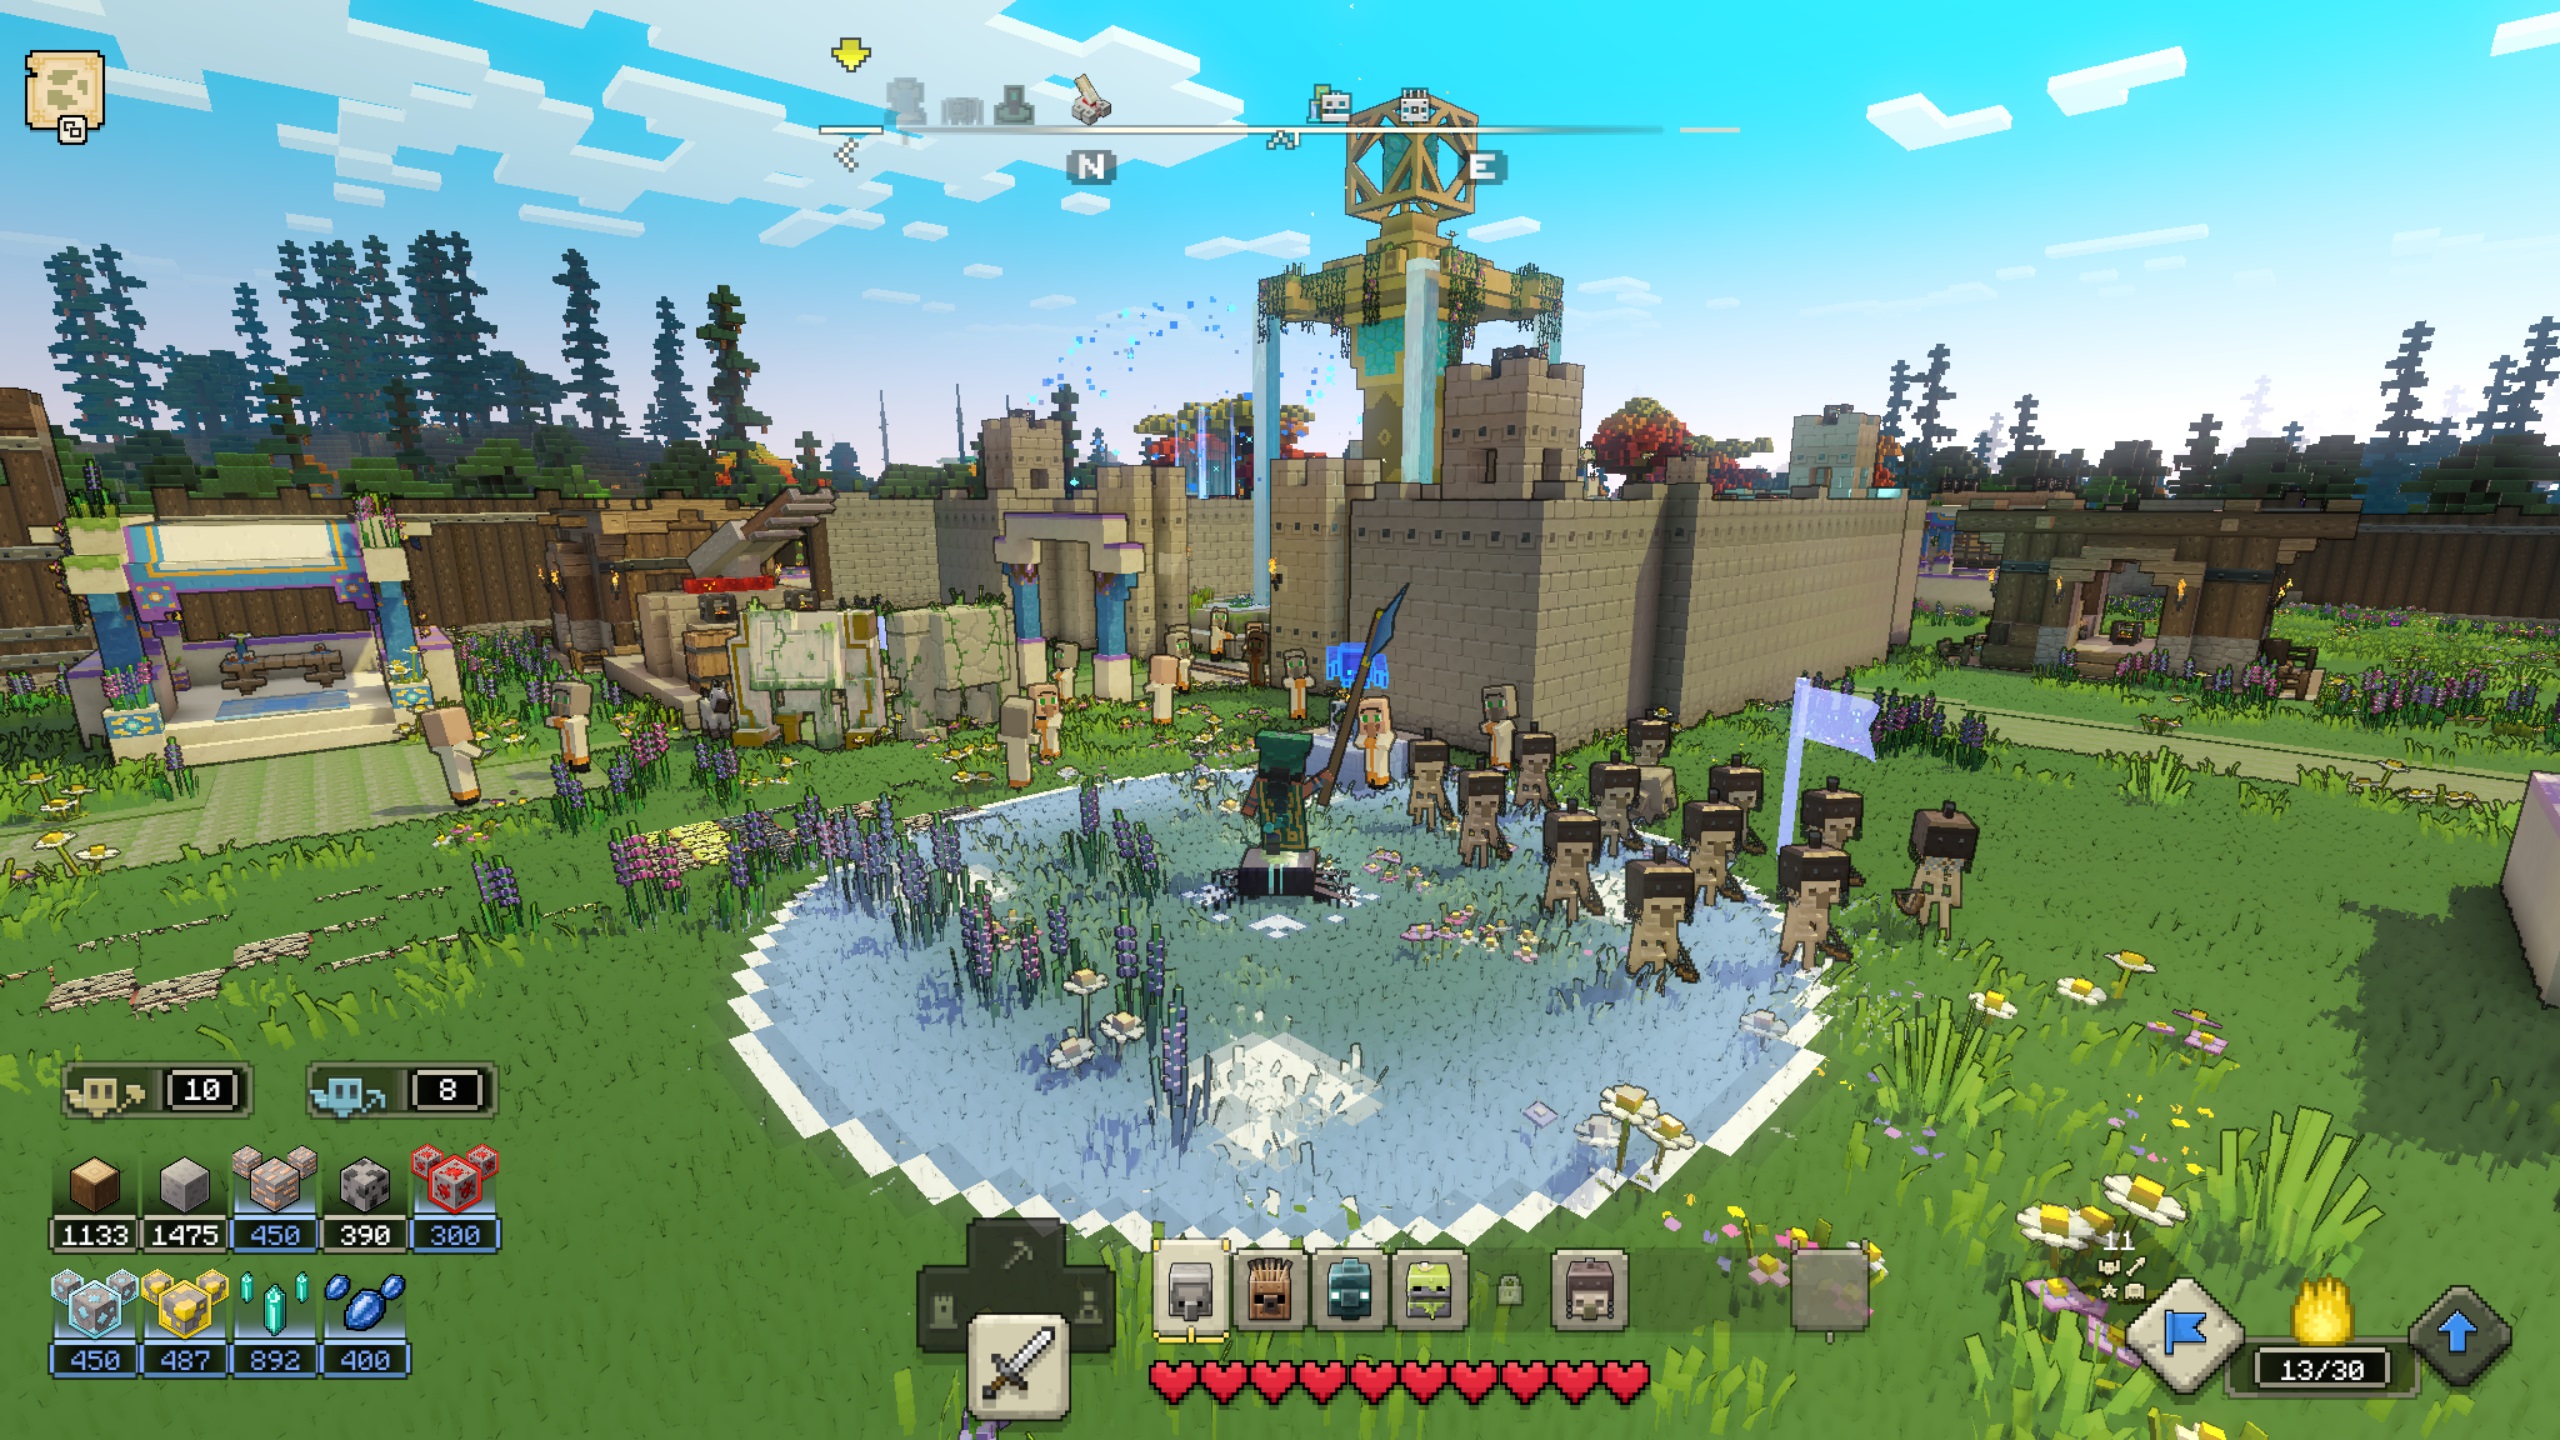 Minecraft Legends - A player stands inside a small village waving a blue command flag to summon a group of skeletons